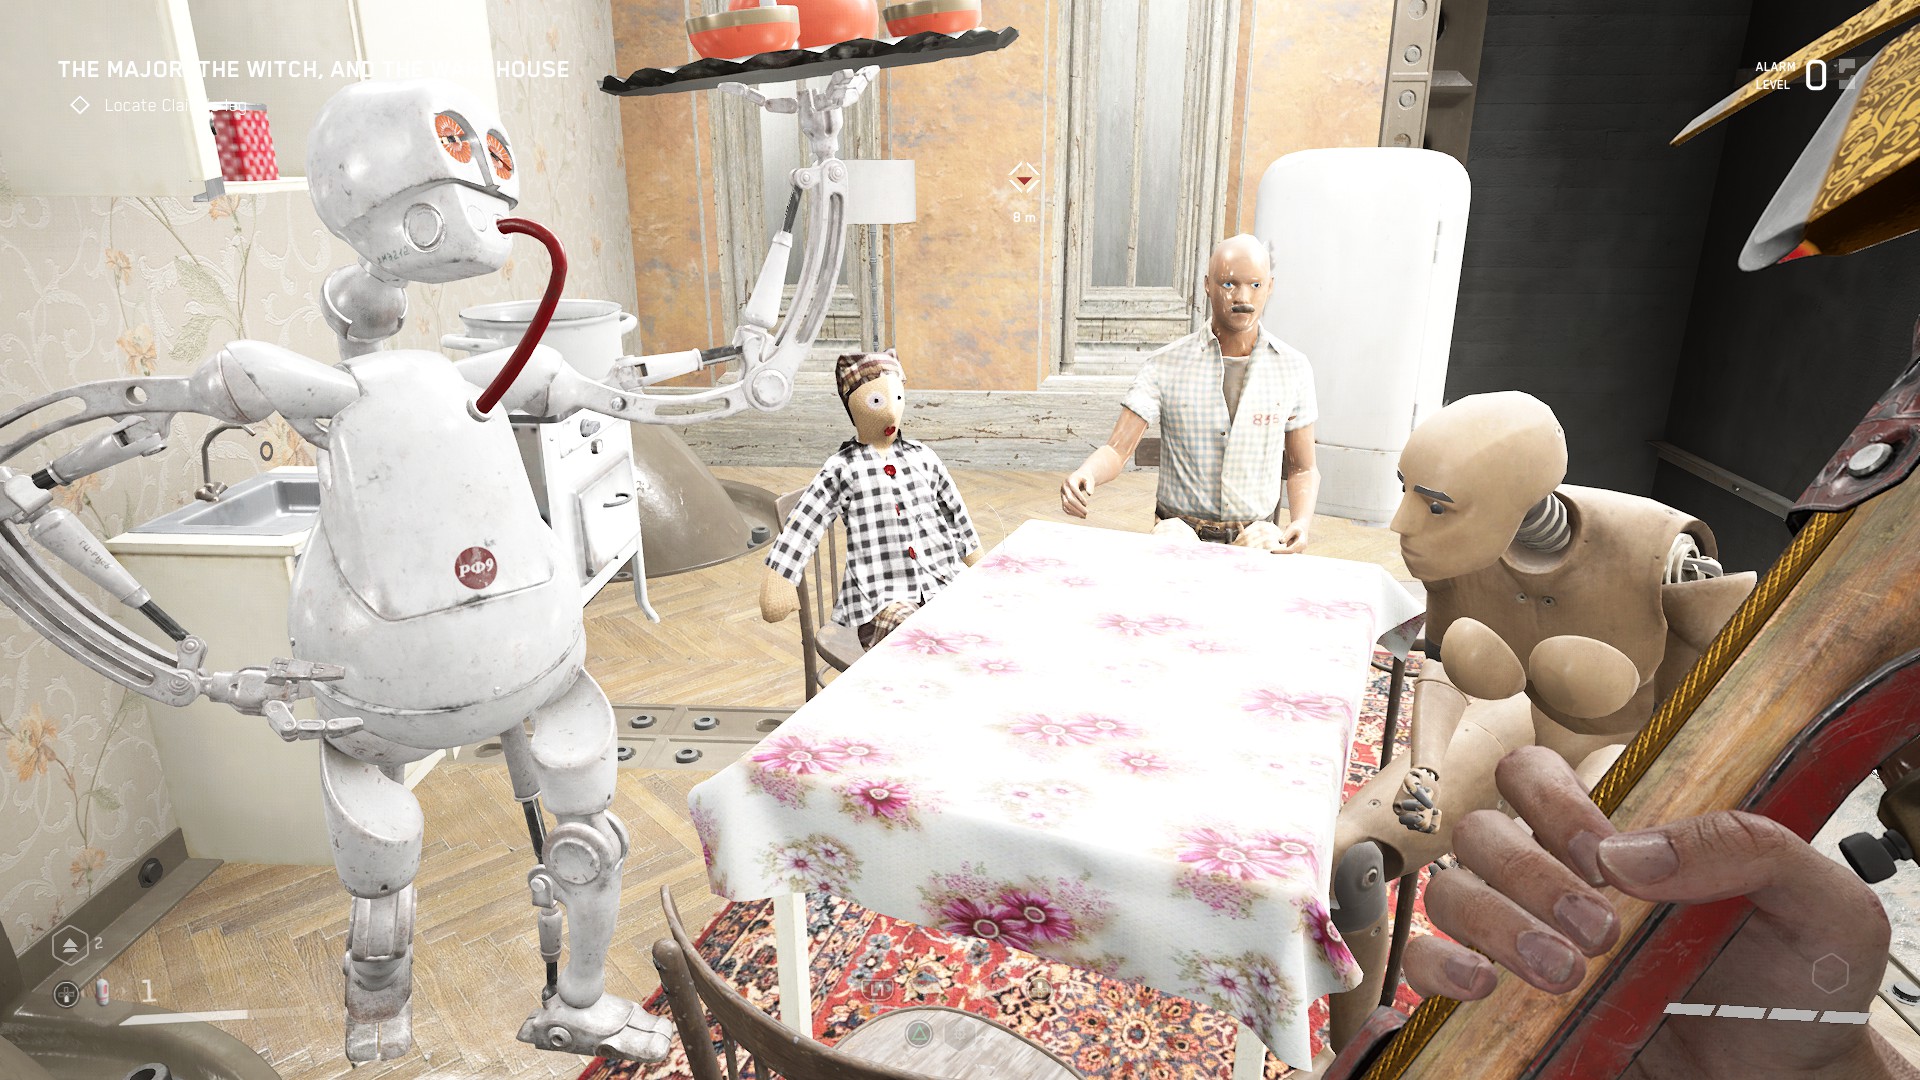 An android domestic diorama in Atomic Heart.